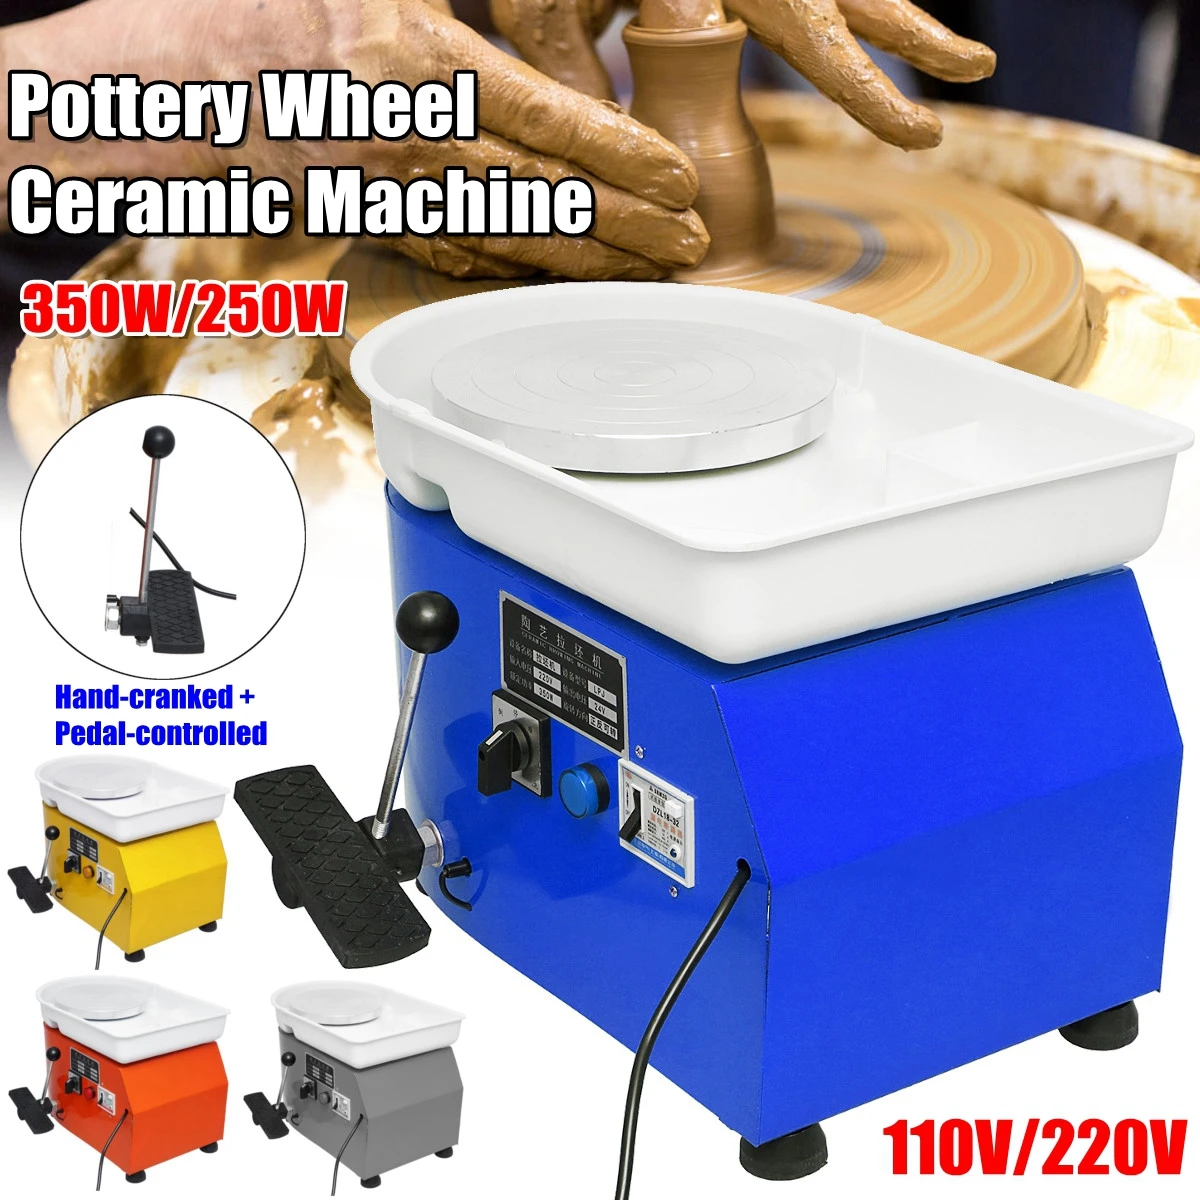 

220V Pottery Forming Machine 250W/350W Electric Pottery Wheel DIY Clay Tool with Tray For Ceramic Work Ceramics